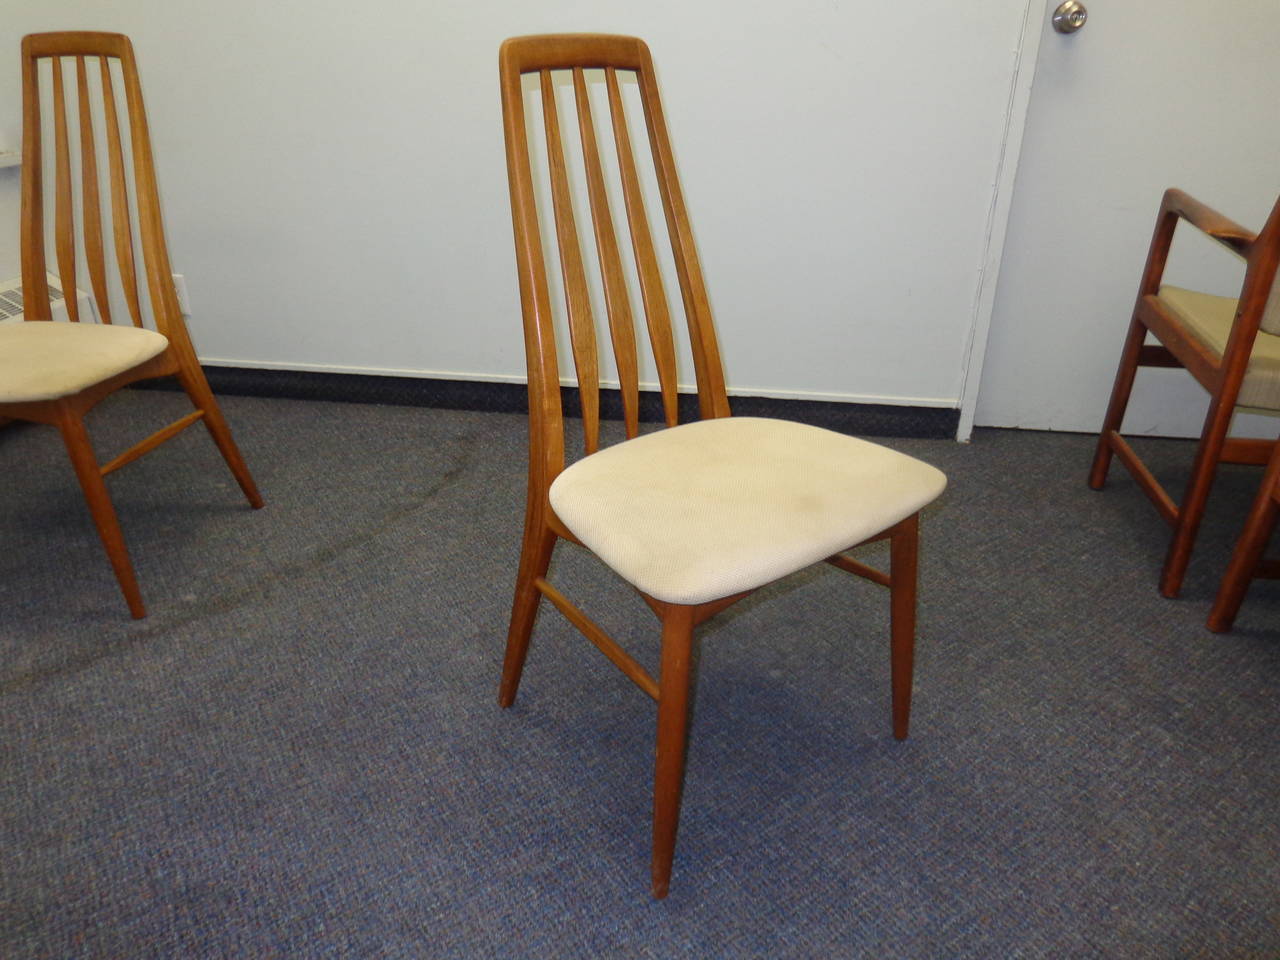 Eva Chair by Niels Koefoed for Hornslet Mobelfabrik in Teak In Excellent Condition For Sale In Ottawa, ON